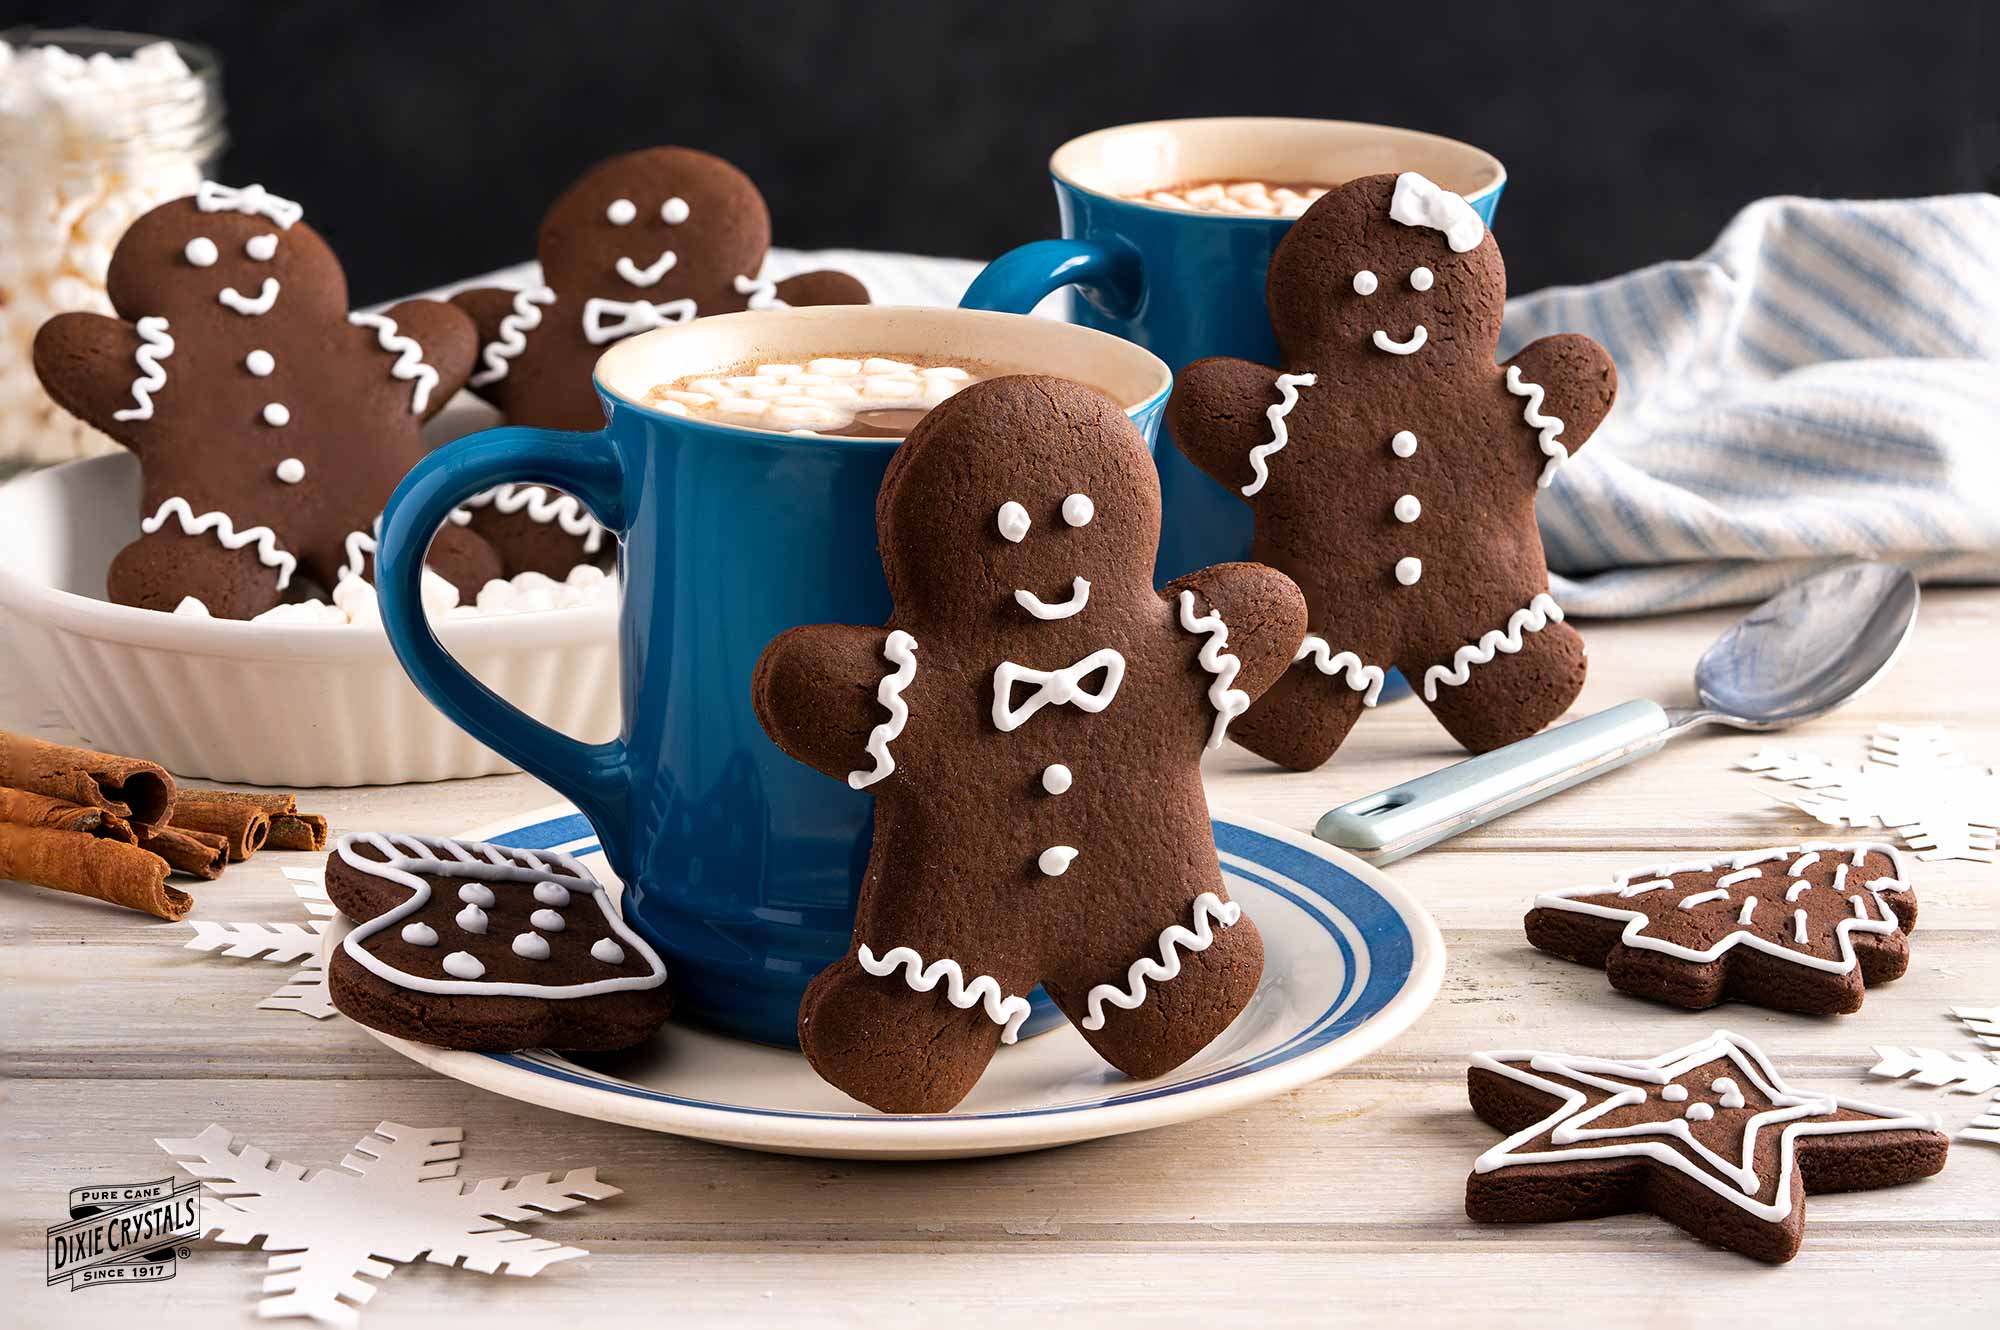 "hot cocoa gingerbread cookies dixie"